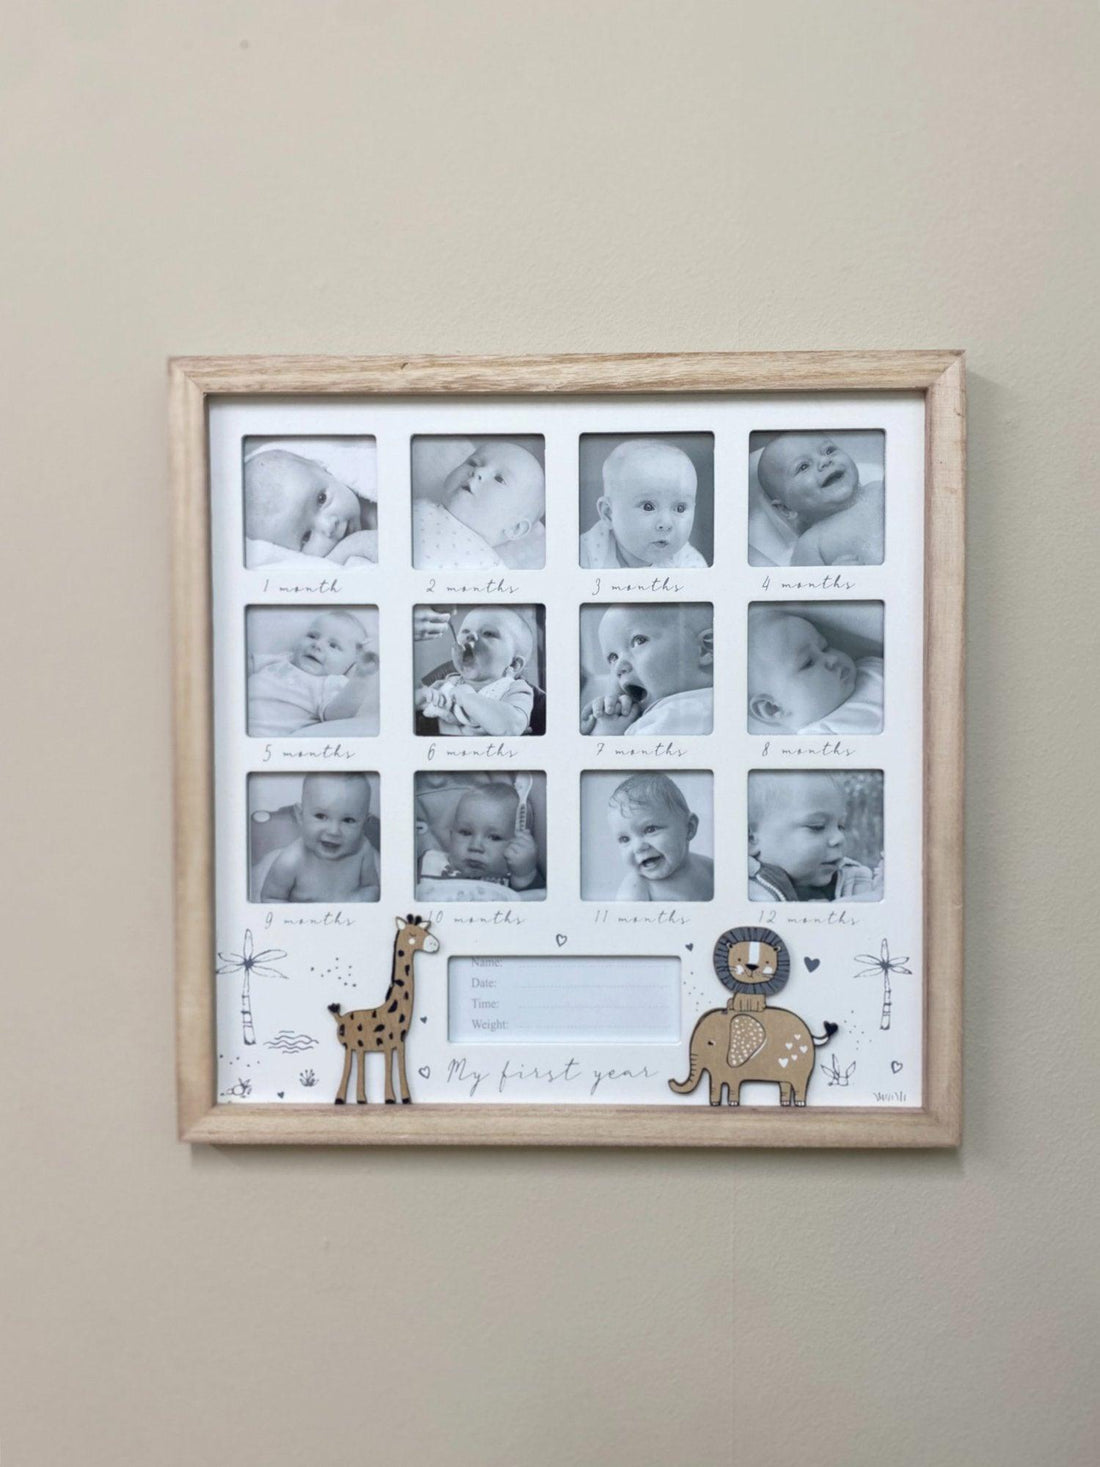 My First Year Photograph Frame 35cm - £33.99 - New Baby 